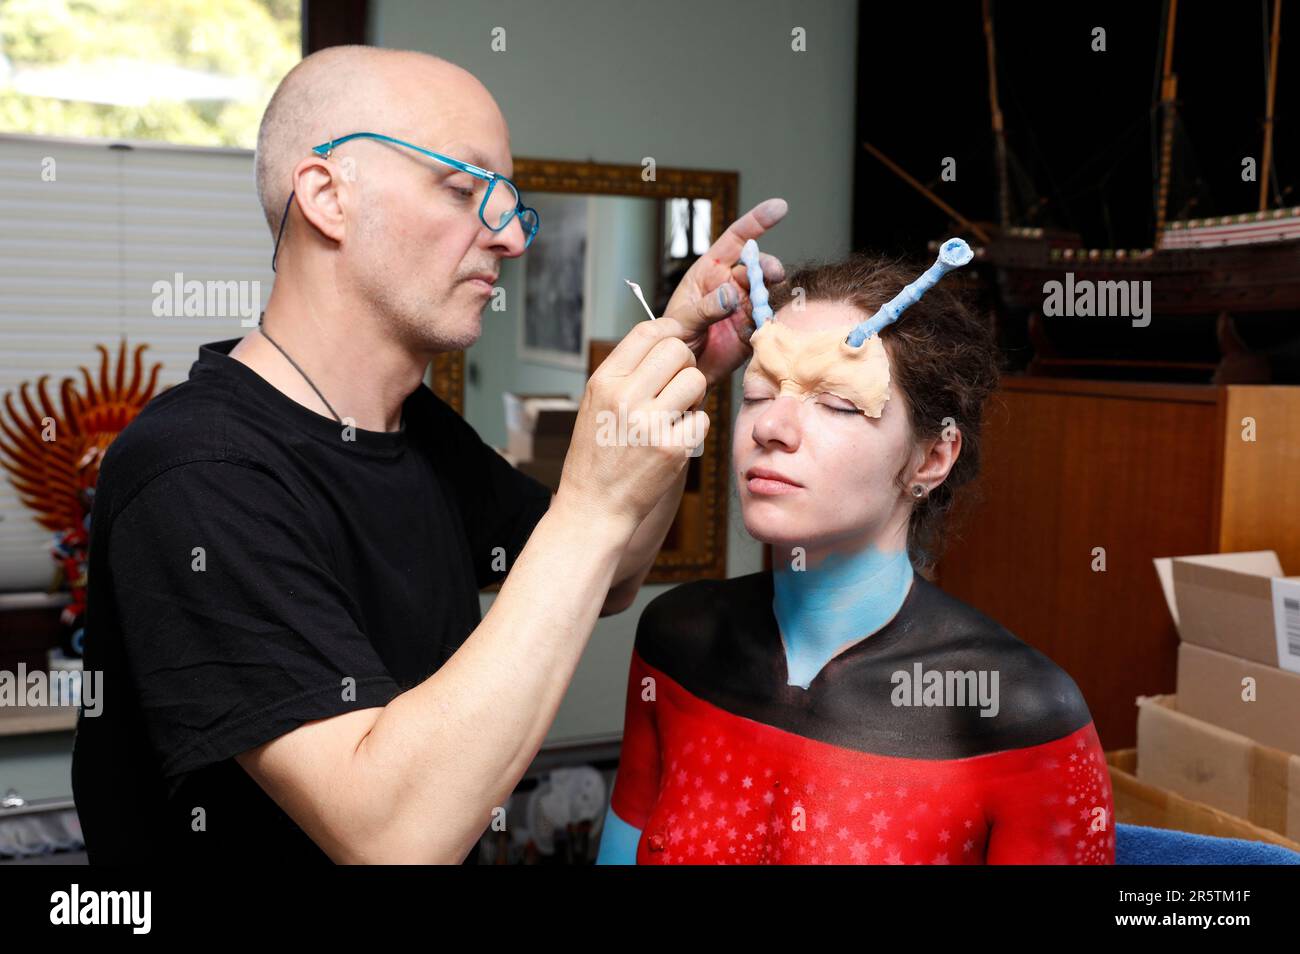 GEEK ART - Bodypainting and Transformaking: Bodypainter Enrico Lein and model Julia preparing for the Star Trek photoshooting at Flentjenburg in Springe on June 04, 2023 - A project by photographer Tschiponnique Skupin and bodypainter Enrico Lein Stock Photo